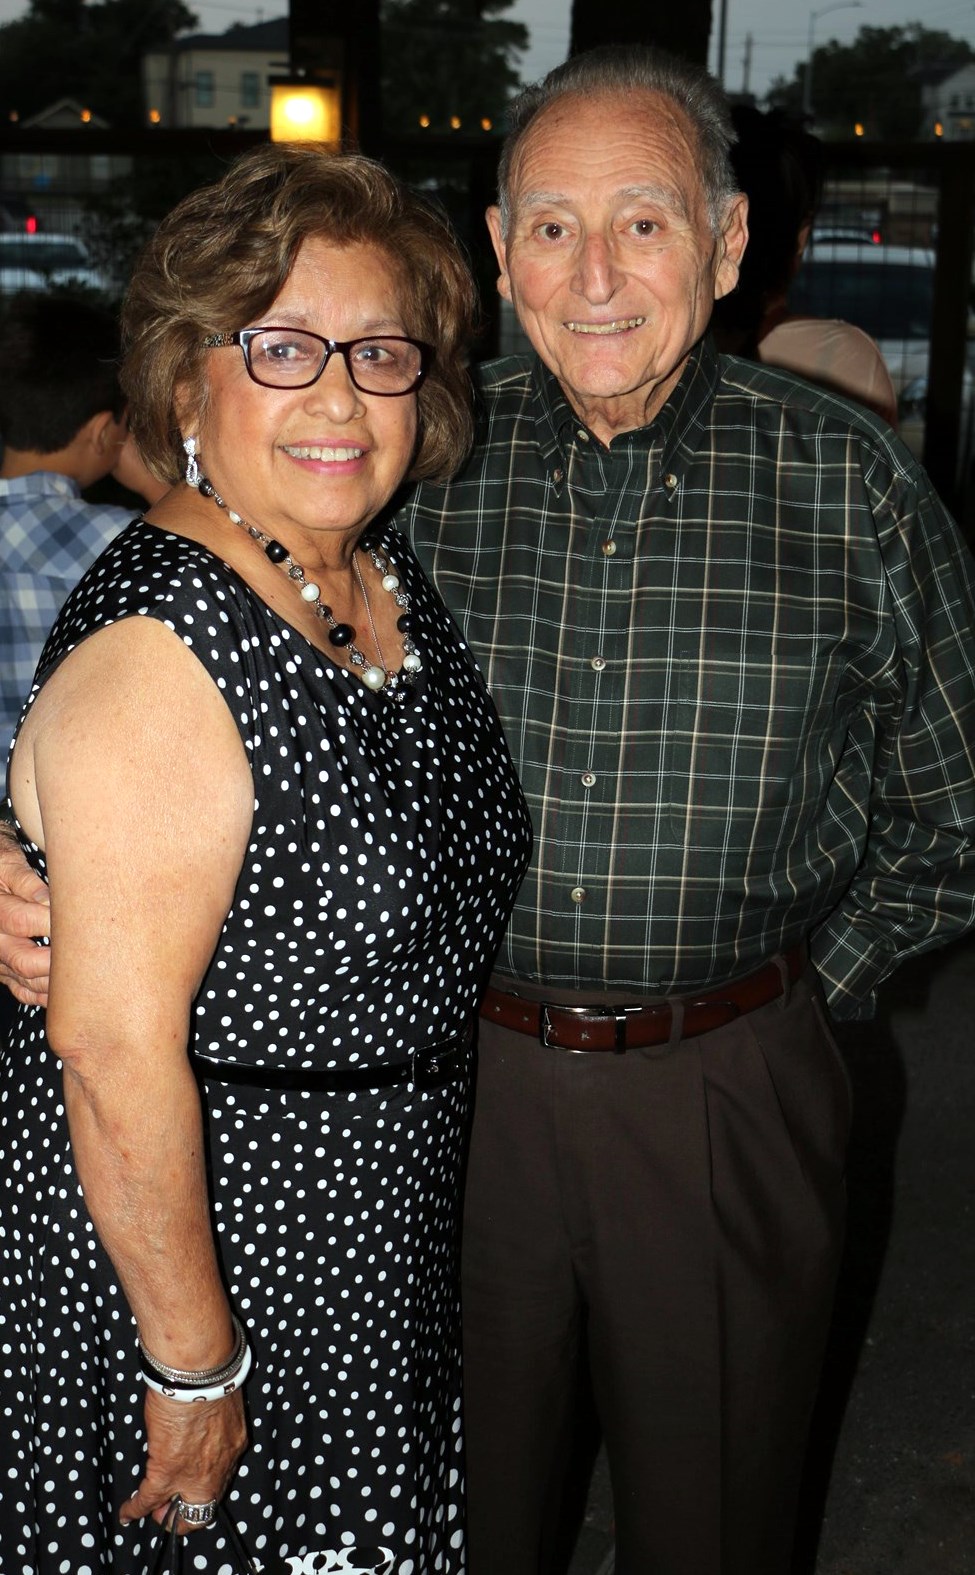 Obituary of George N Zuckero - 08/27/2019 - From the Family